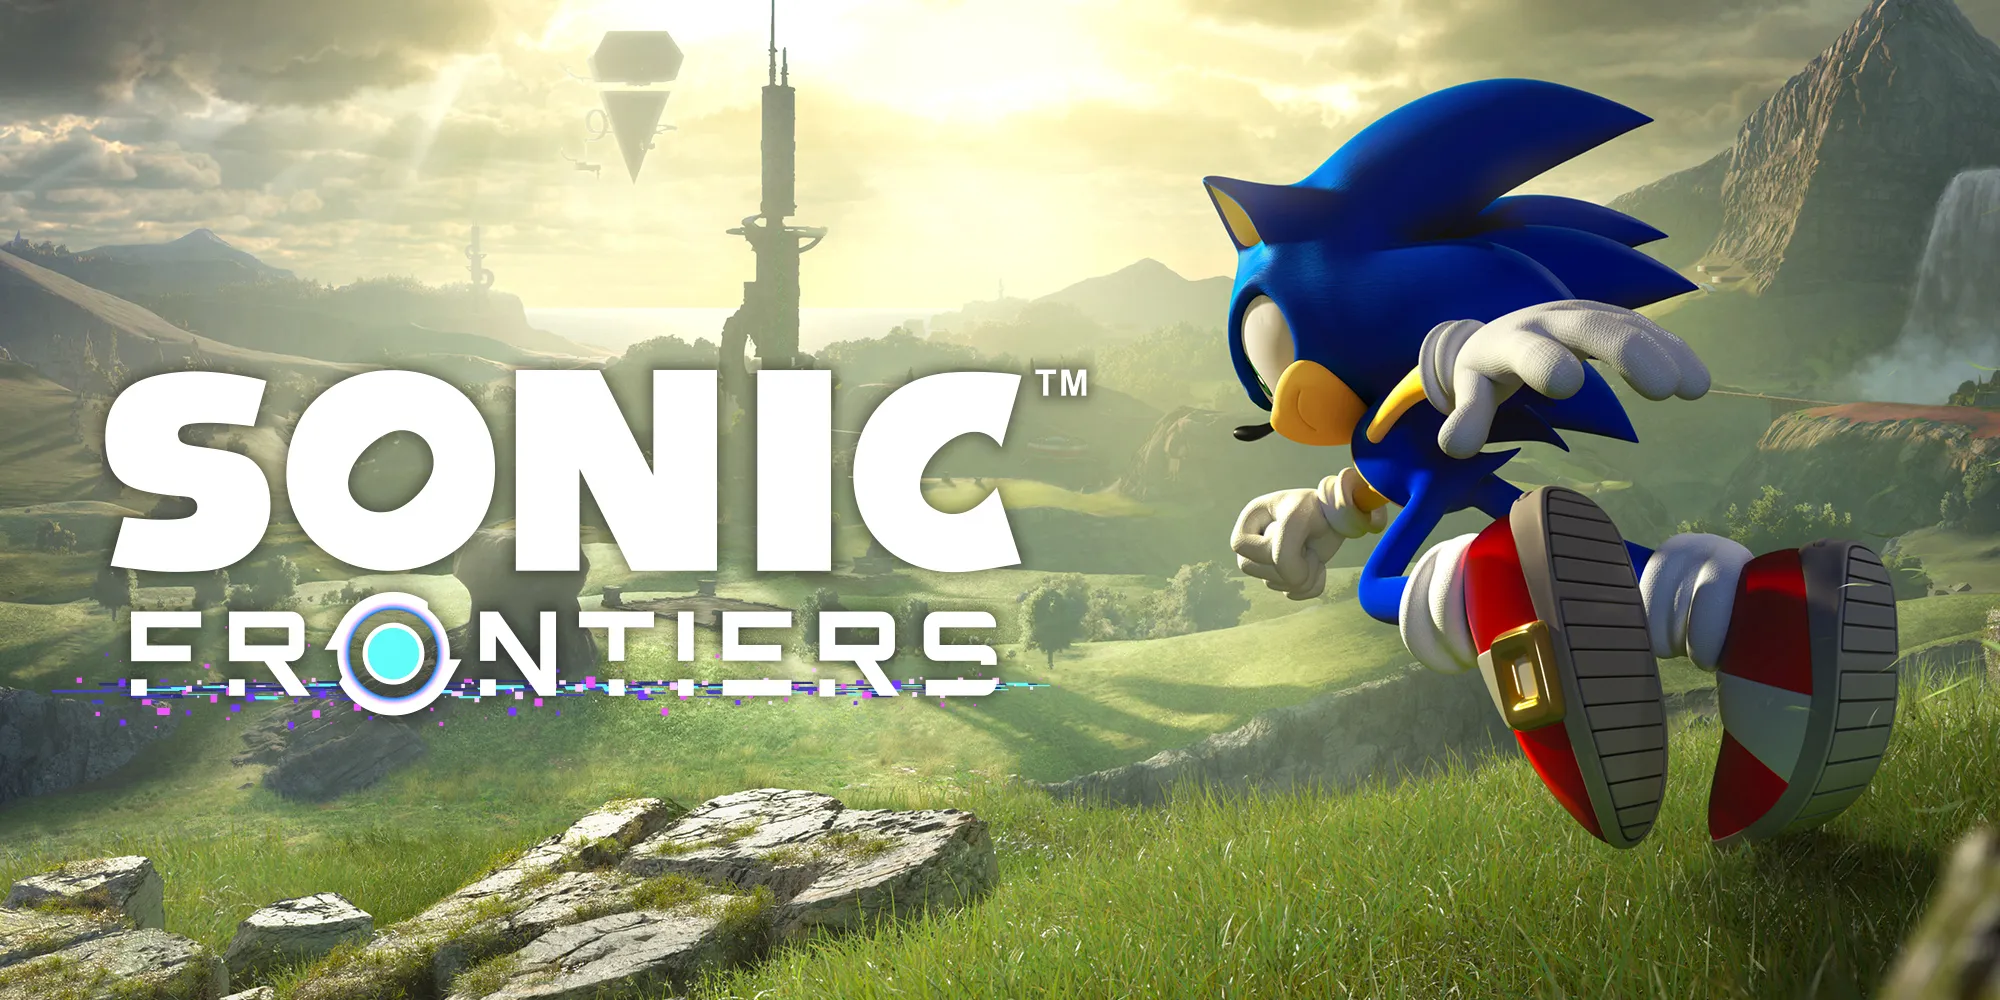 Sonic Frontiers spins onto PC and consoles